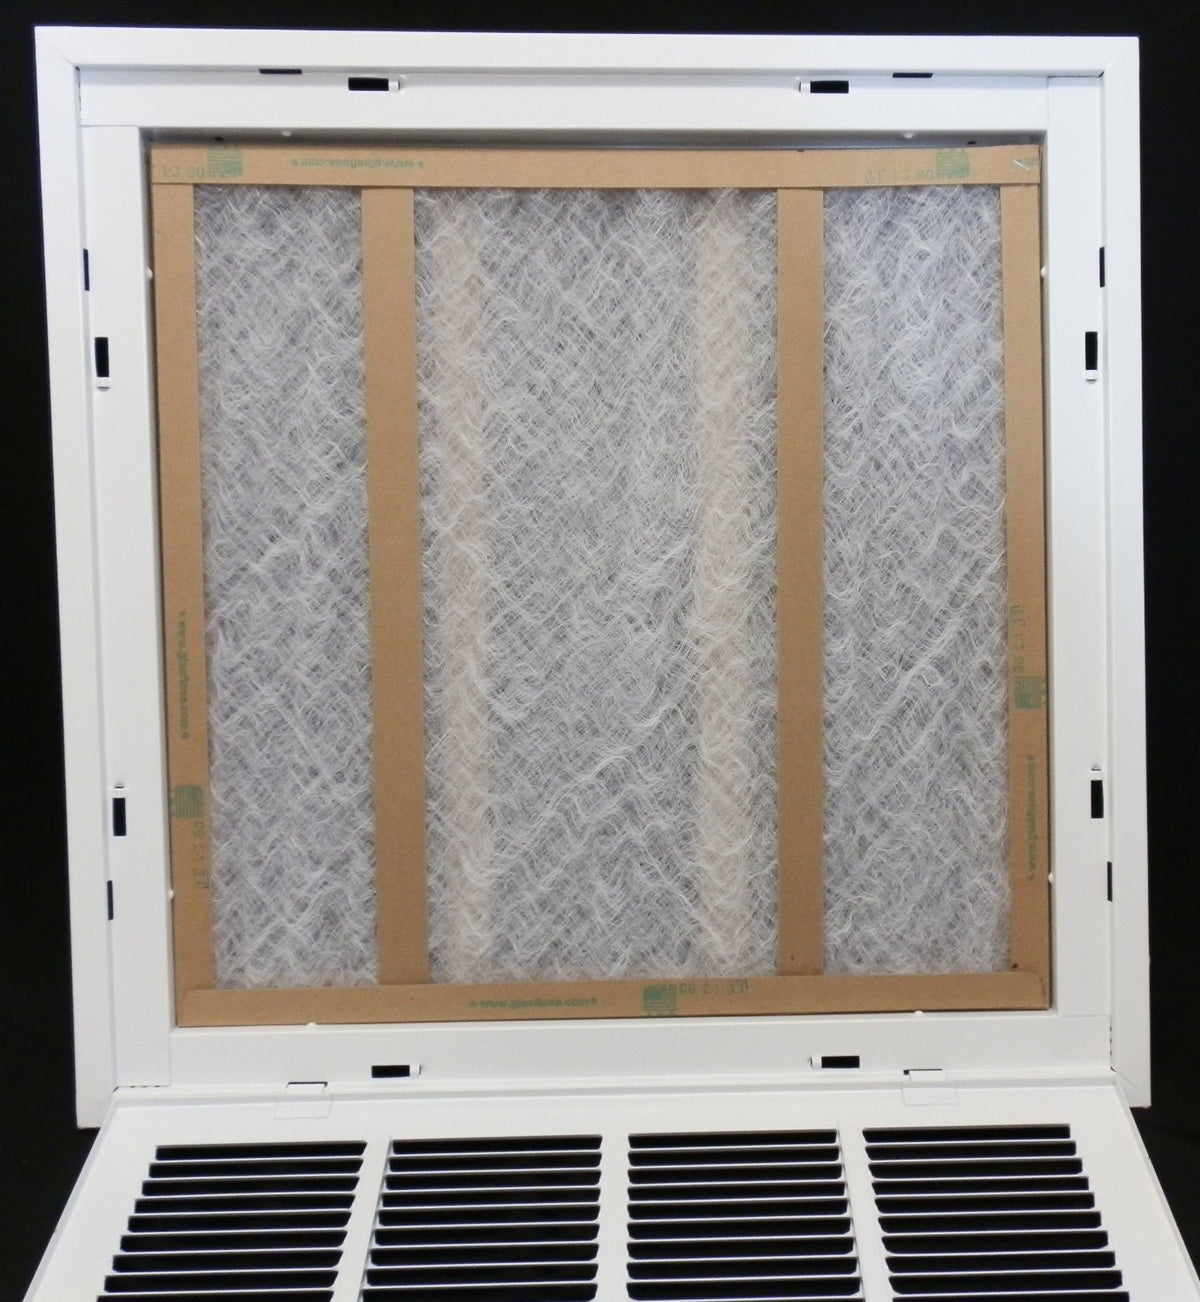 25&quot; X 16&quot; Steel Return Air Filter Grille for 1&quot; Filter - Removable Frame - [Outer Dimensions: 27 5/8&quot; X 18 5/8&quot;]